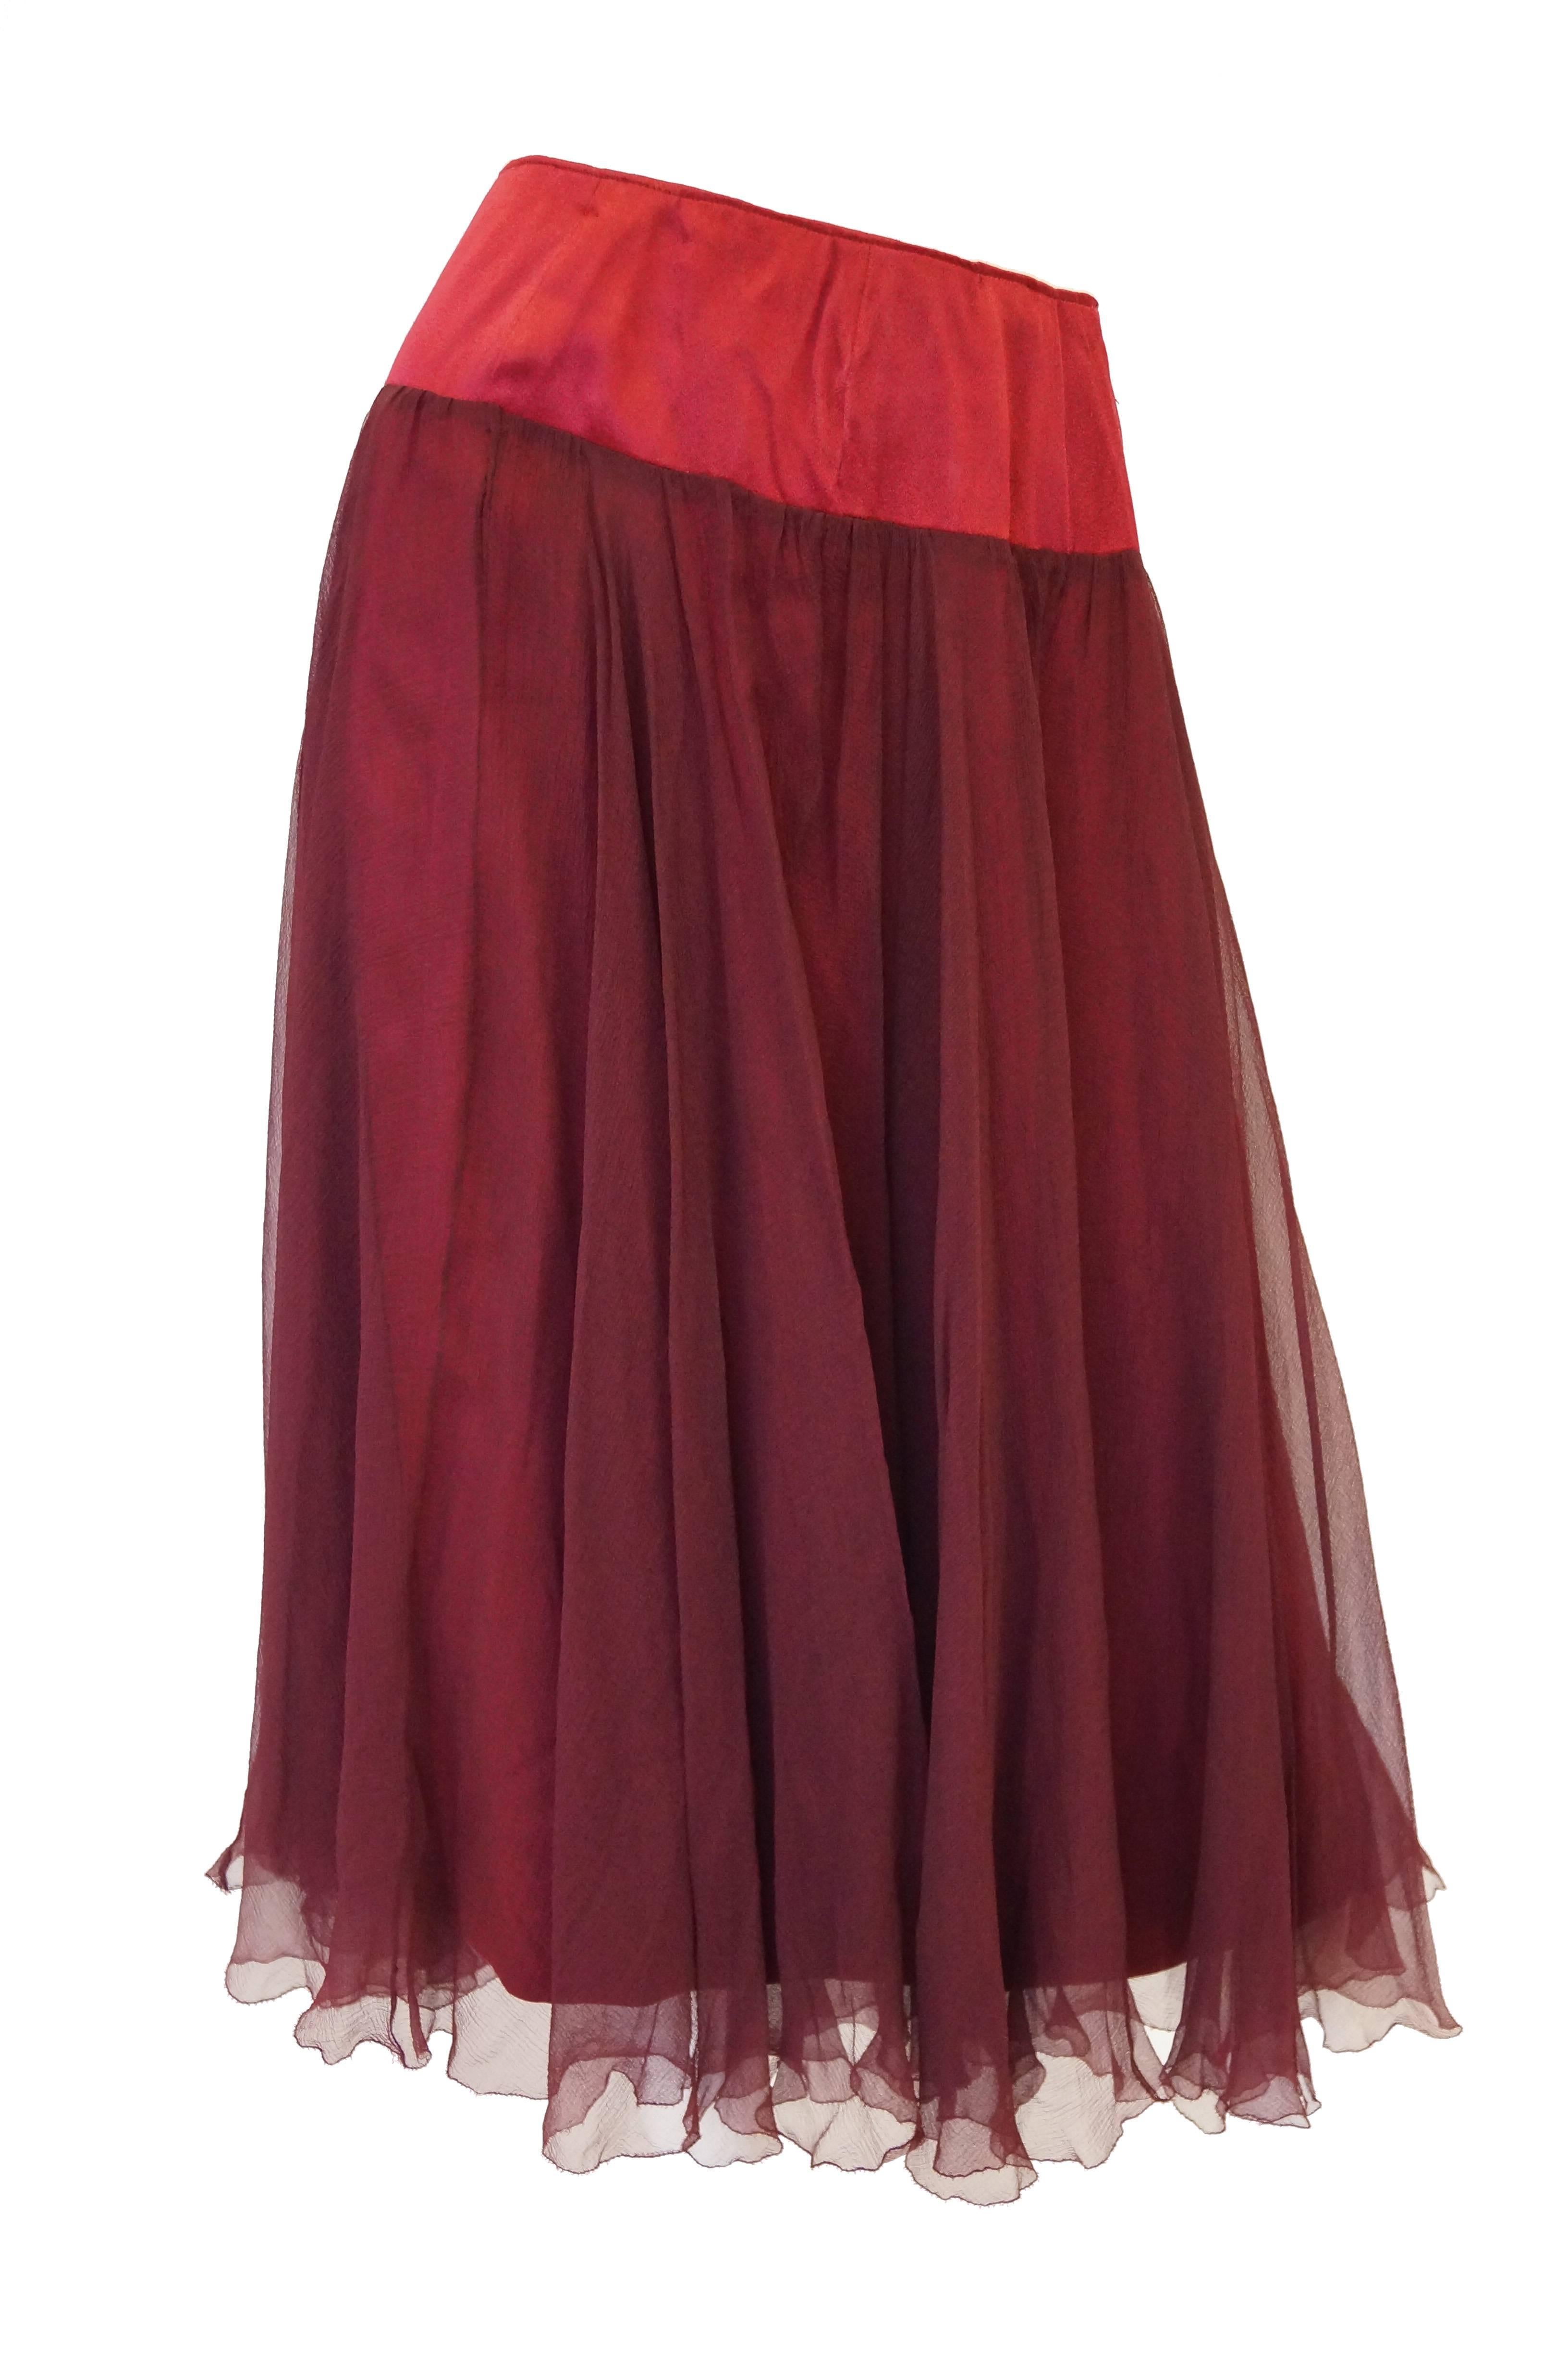 Yves Saint Laurent Couture Evening Dress Owned by Claudette Colbert, 1963  For Sale 10